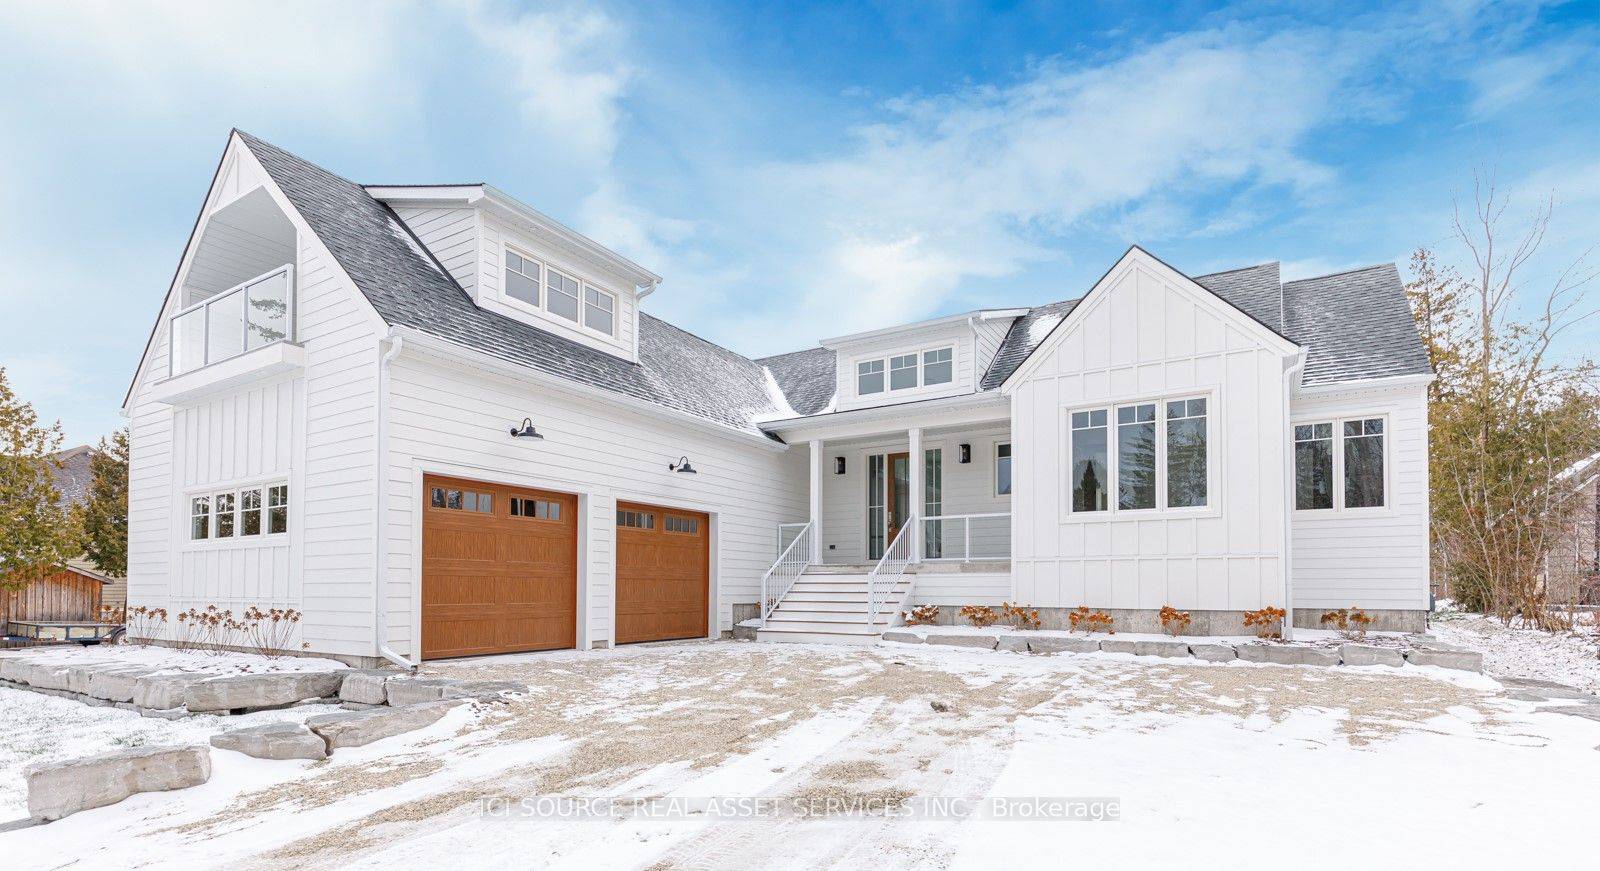 This beautiful home built by VanderMeer Homes located in Collingwood across the road from Georgian Bay is ideal for the retired couple and family.